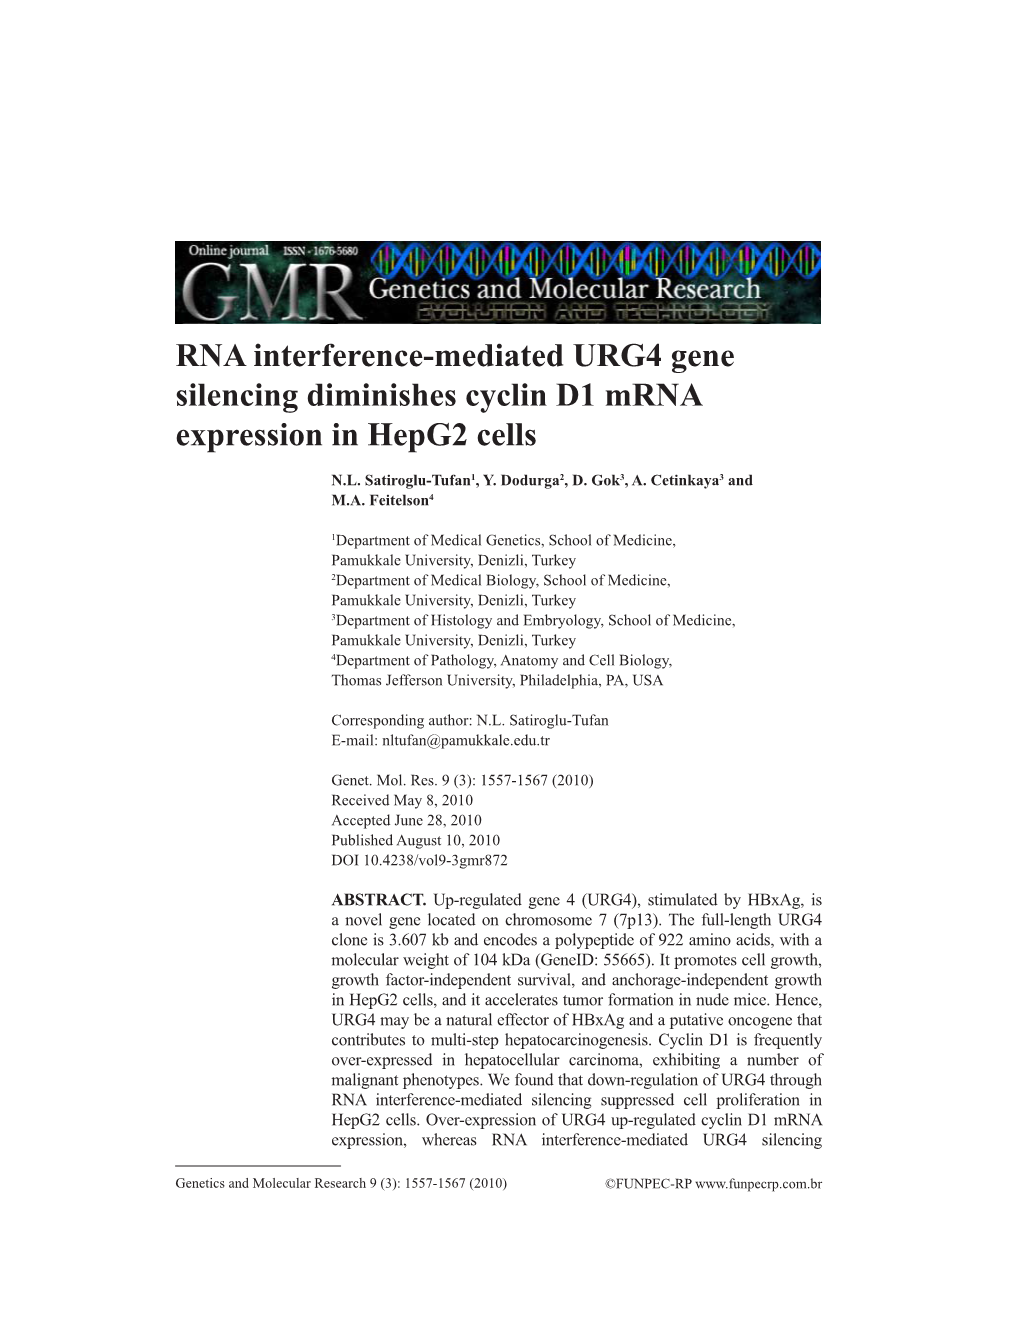 RNA Interference-Mediated URG4 Gene Silencing Diminishes Cyclin D1 Mrna Expression in Hepg2 Cells